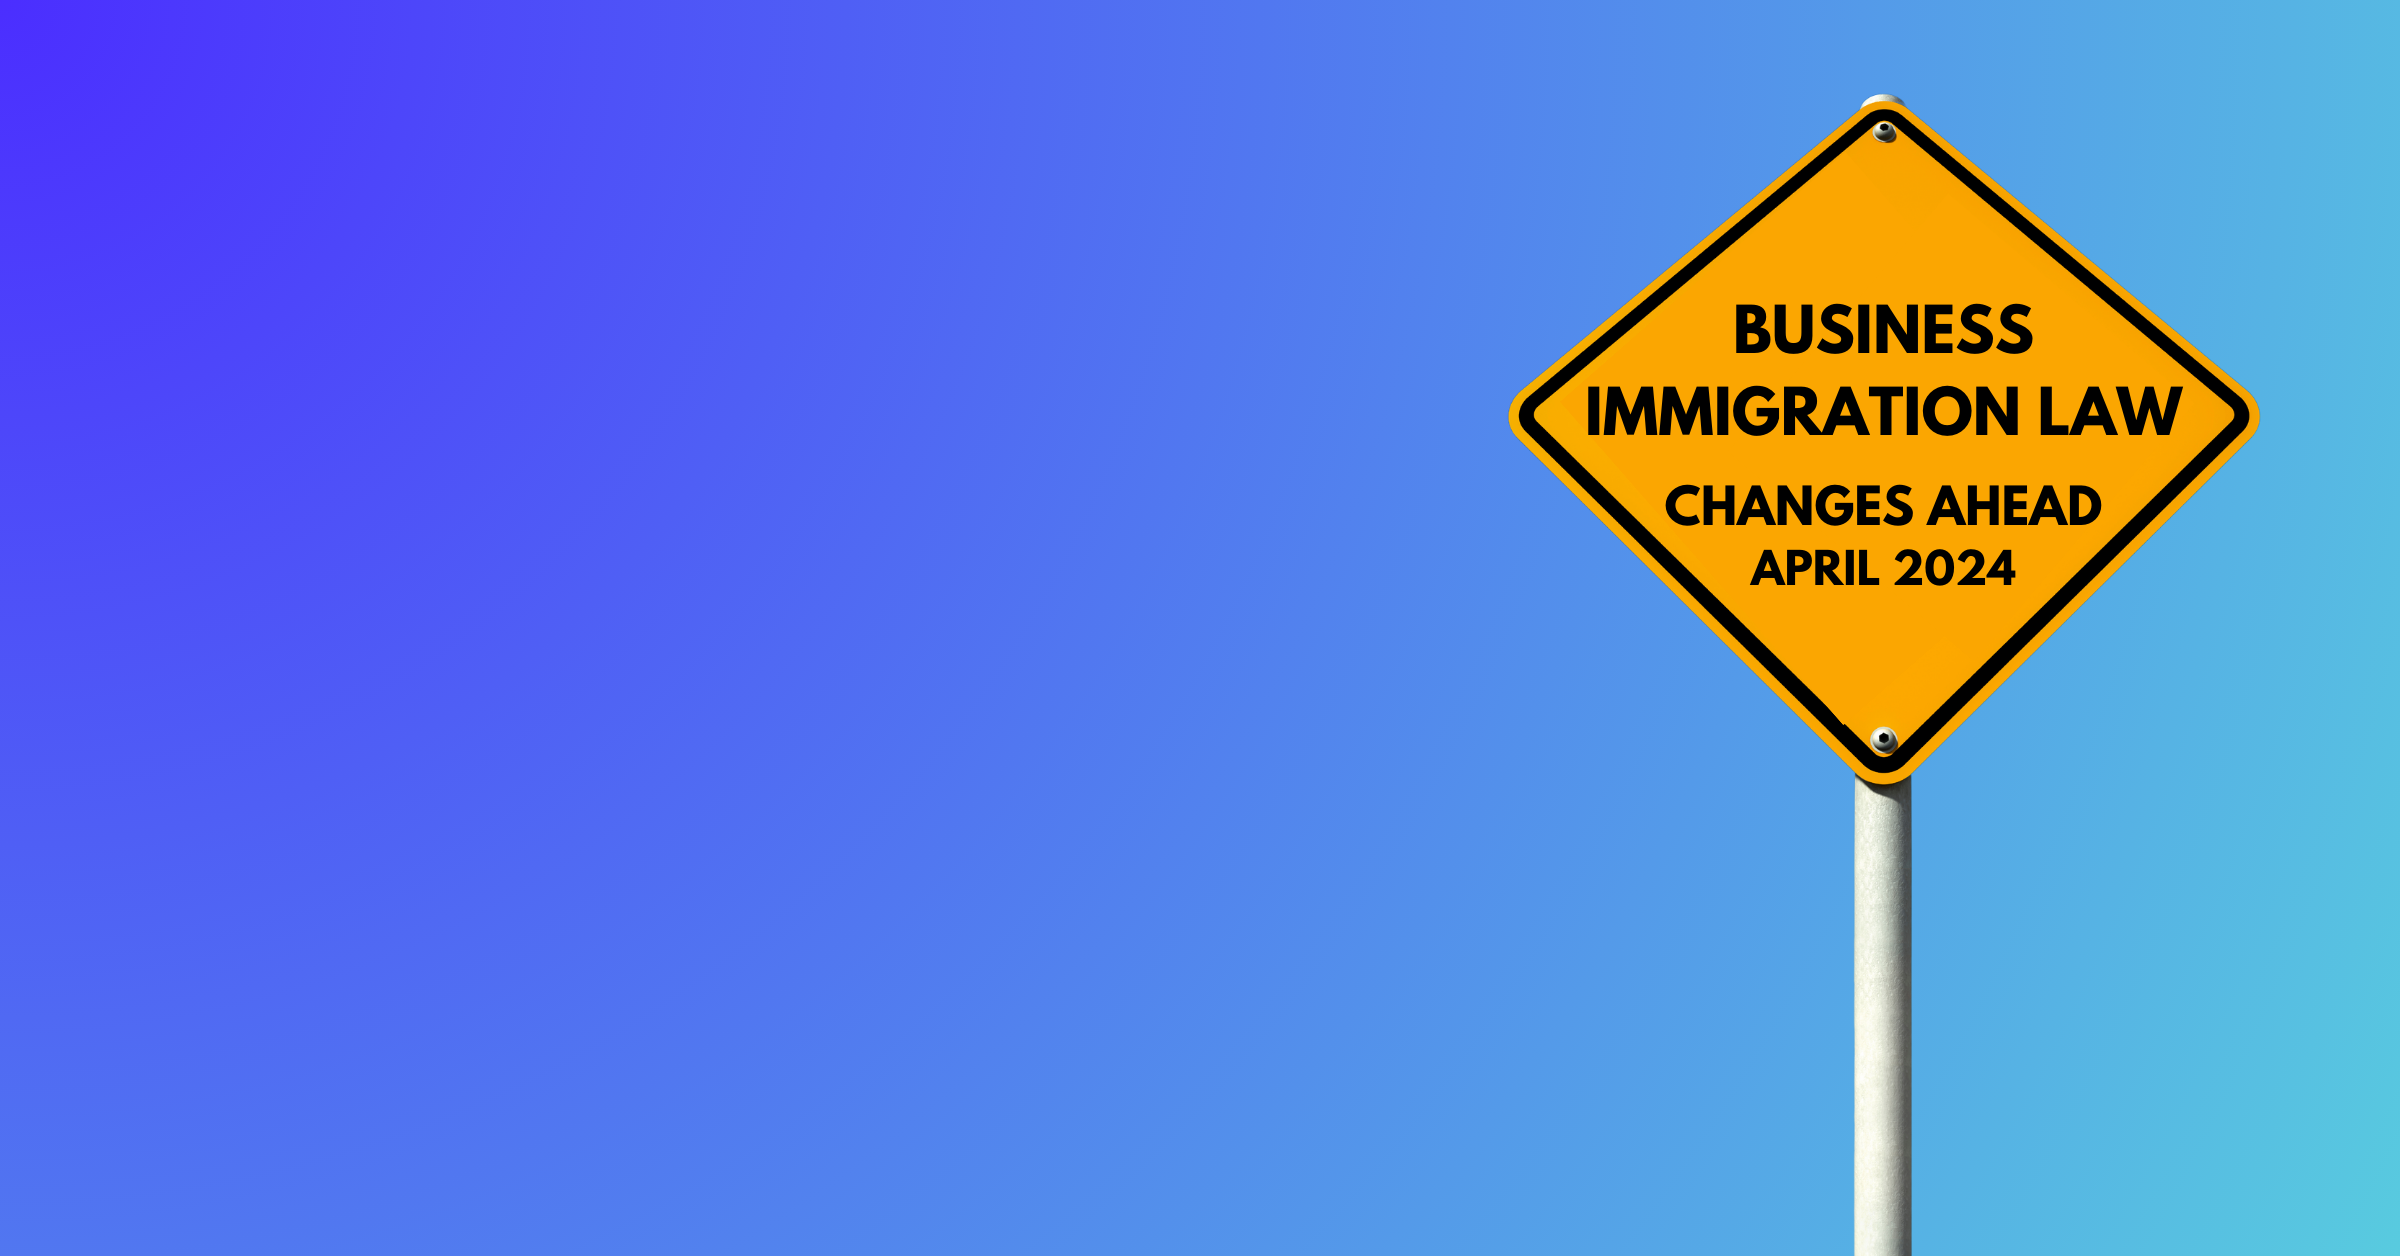 Warning sign for upcoming business immigration rule changing in April 2024